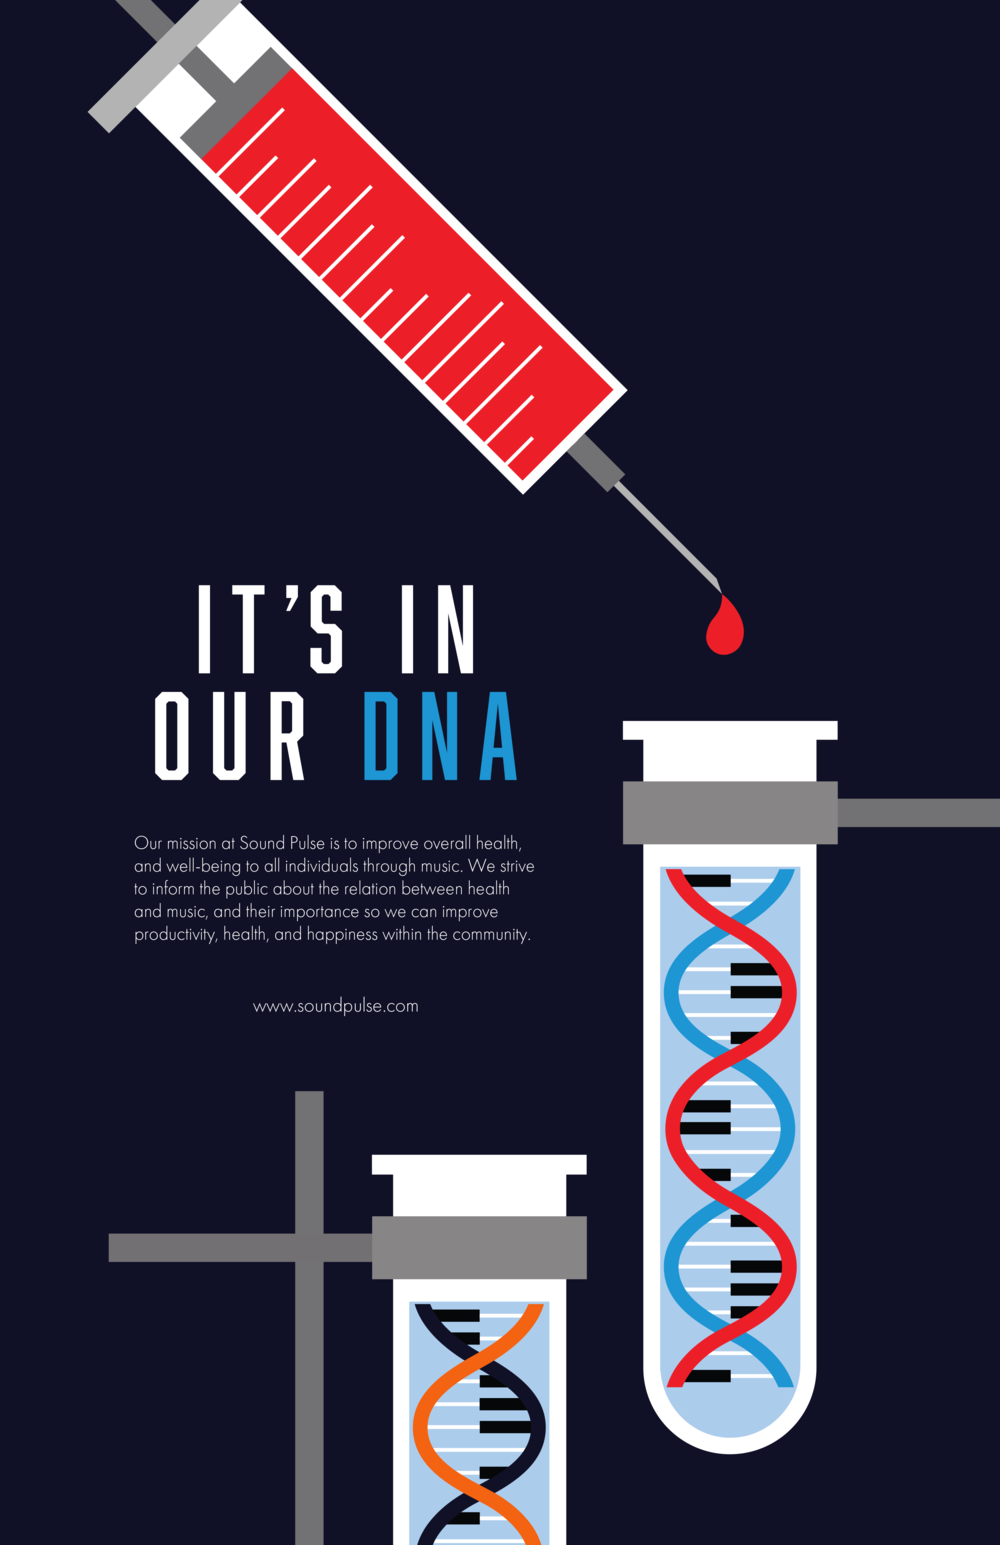 It’s In Our DNA / 11” X 17” / A traditional flyer advertising Sound Pulse’s mission.